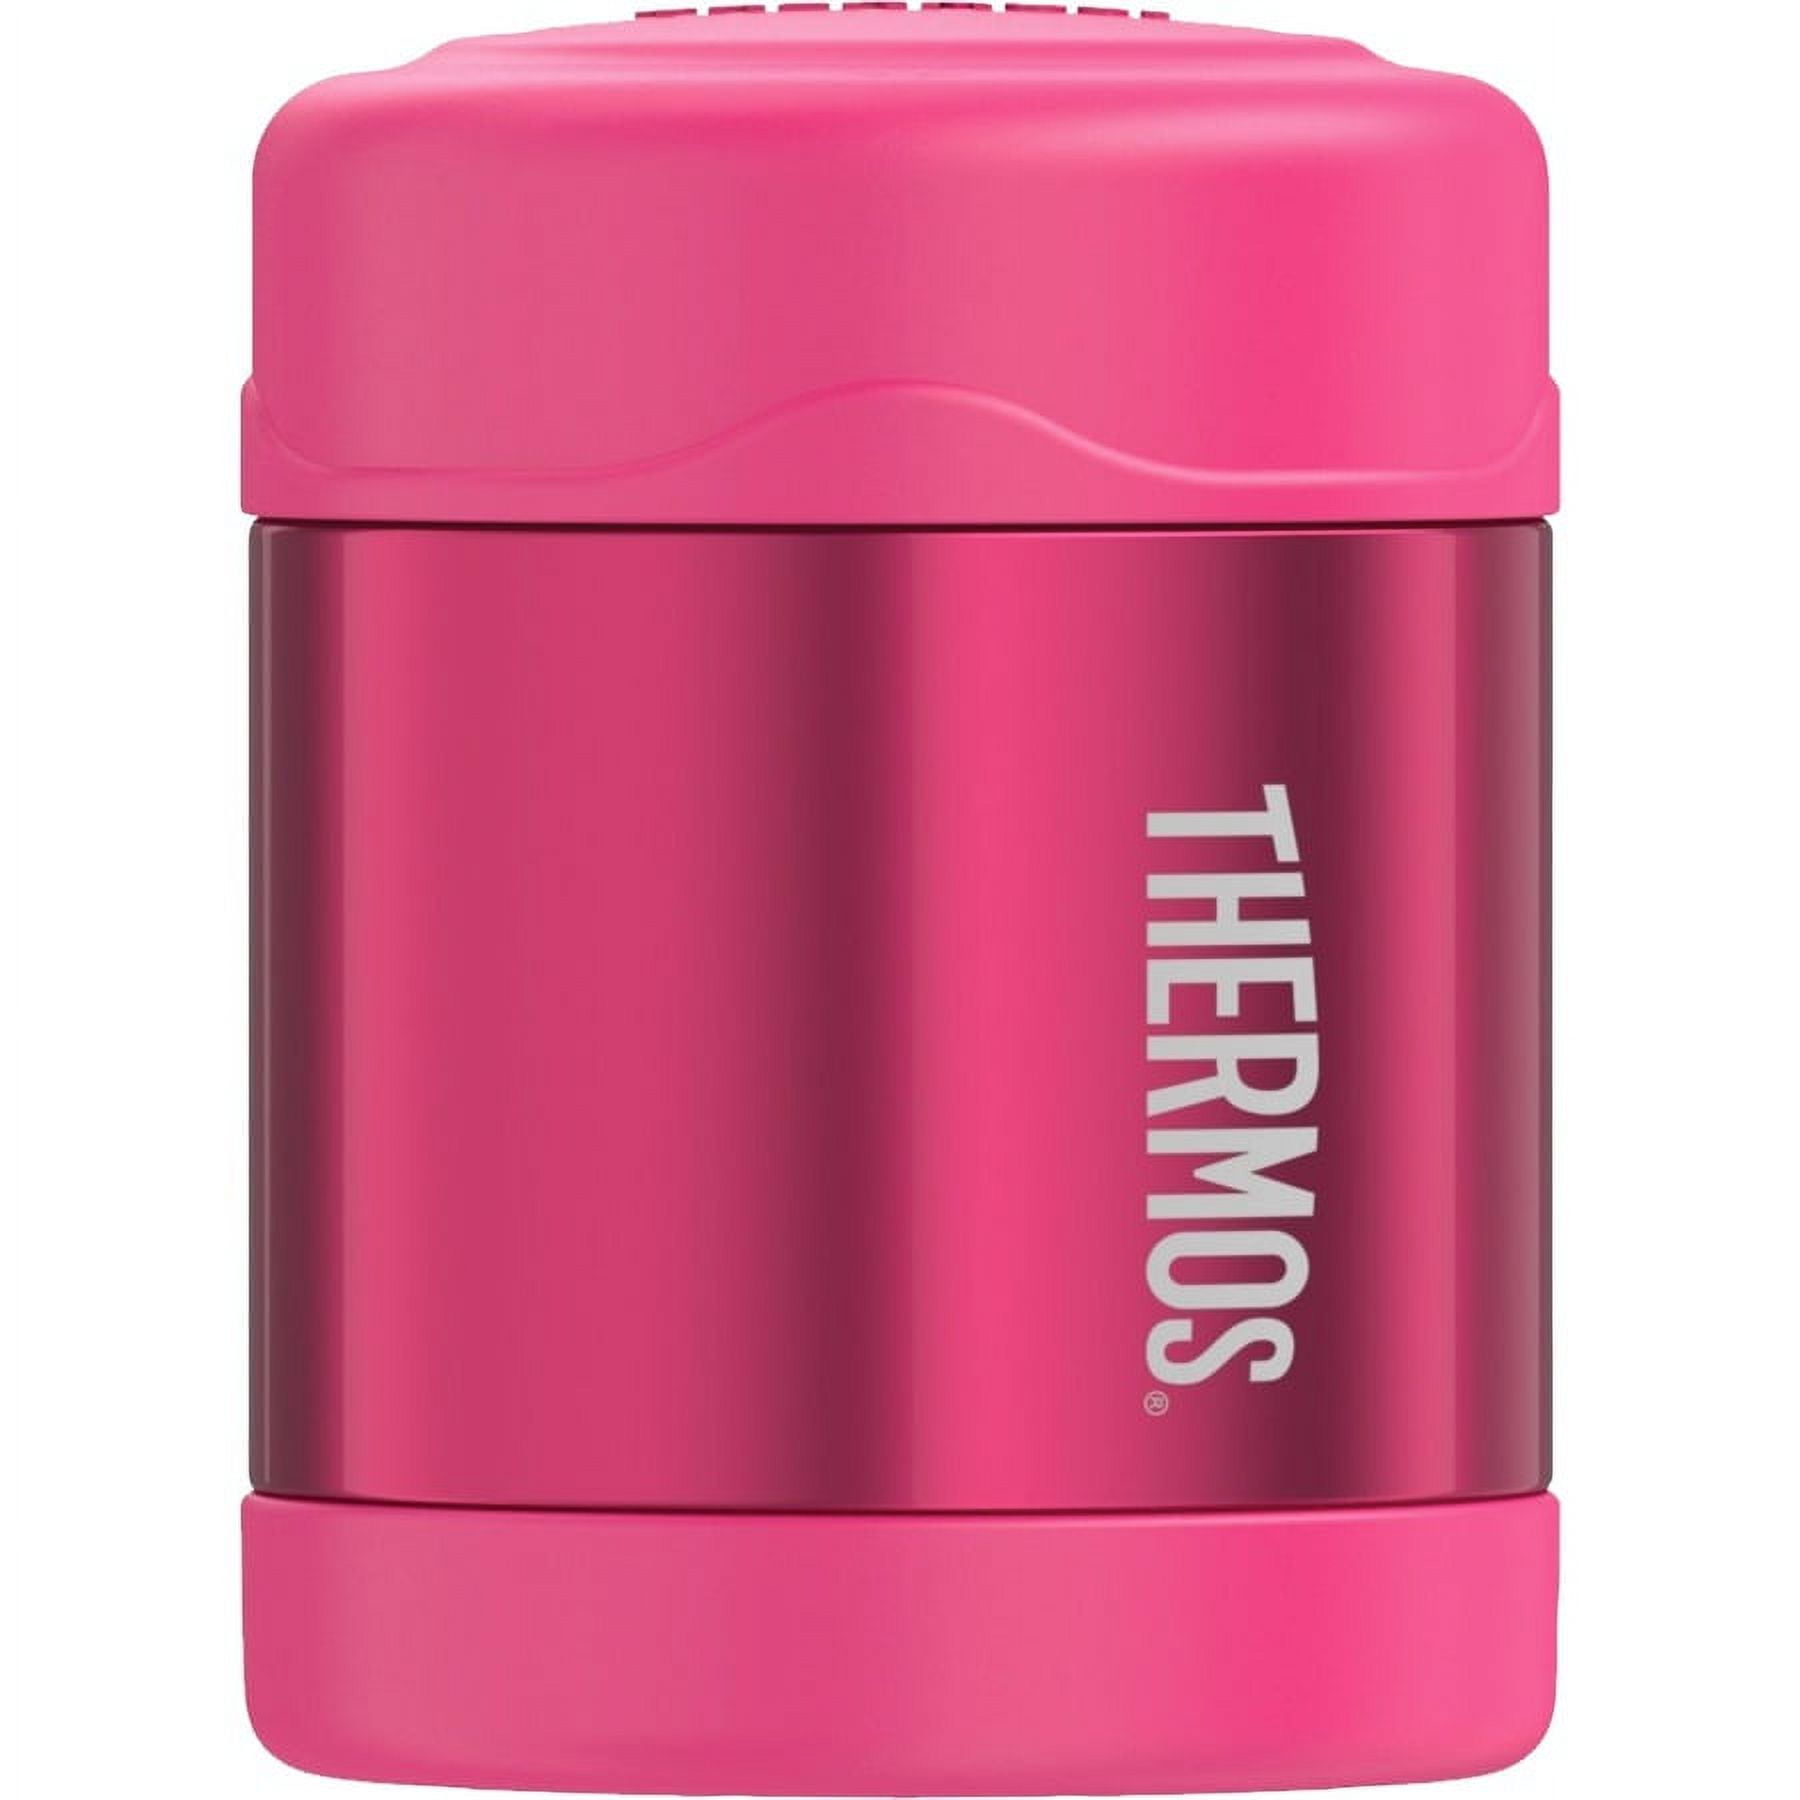 Thermos F3003pk6 Funtainer Stainless Steel Vacuum Insulated Food Jar, 10oz ( pink) 